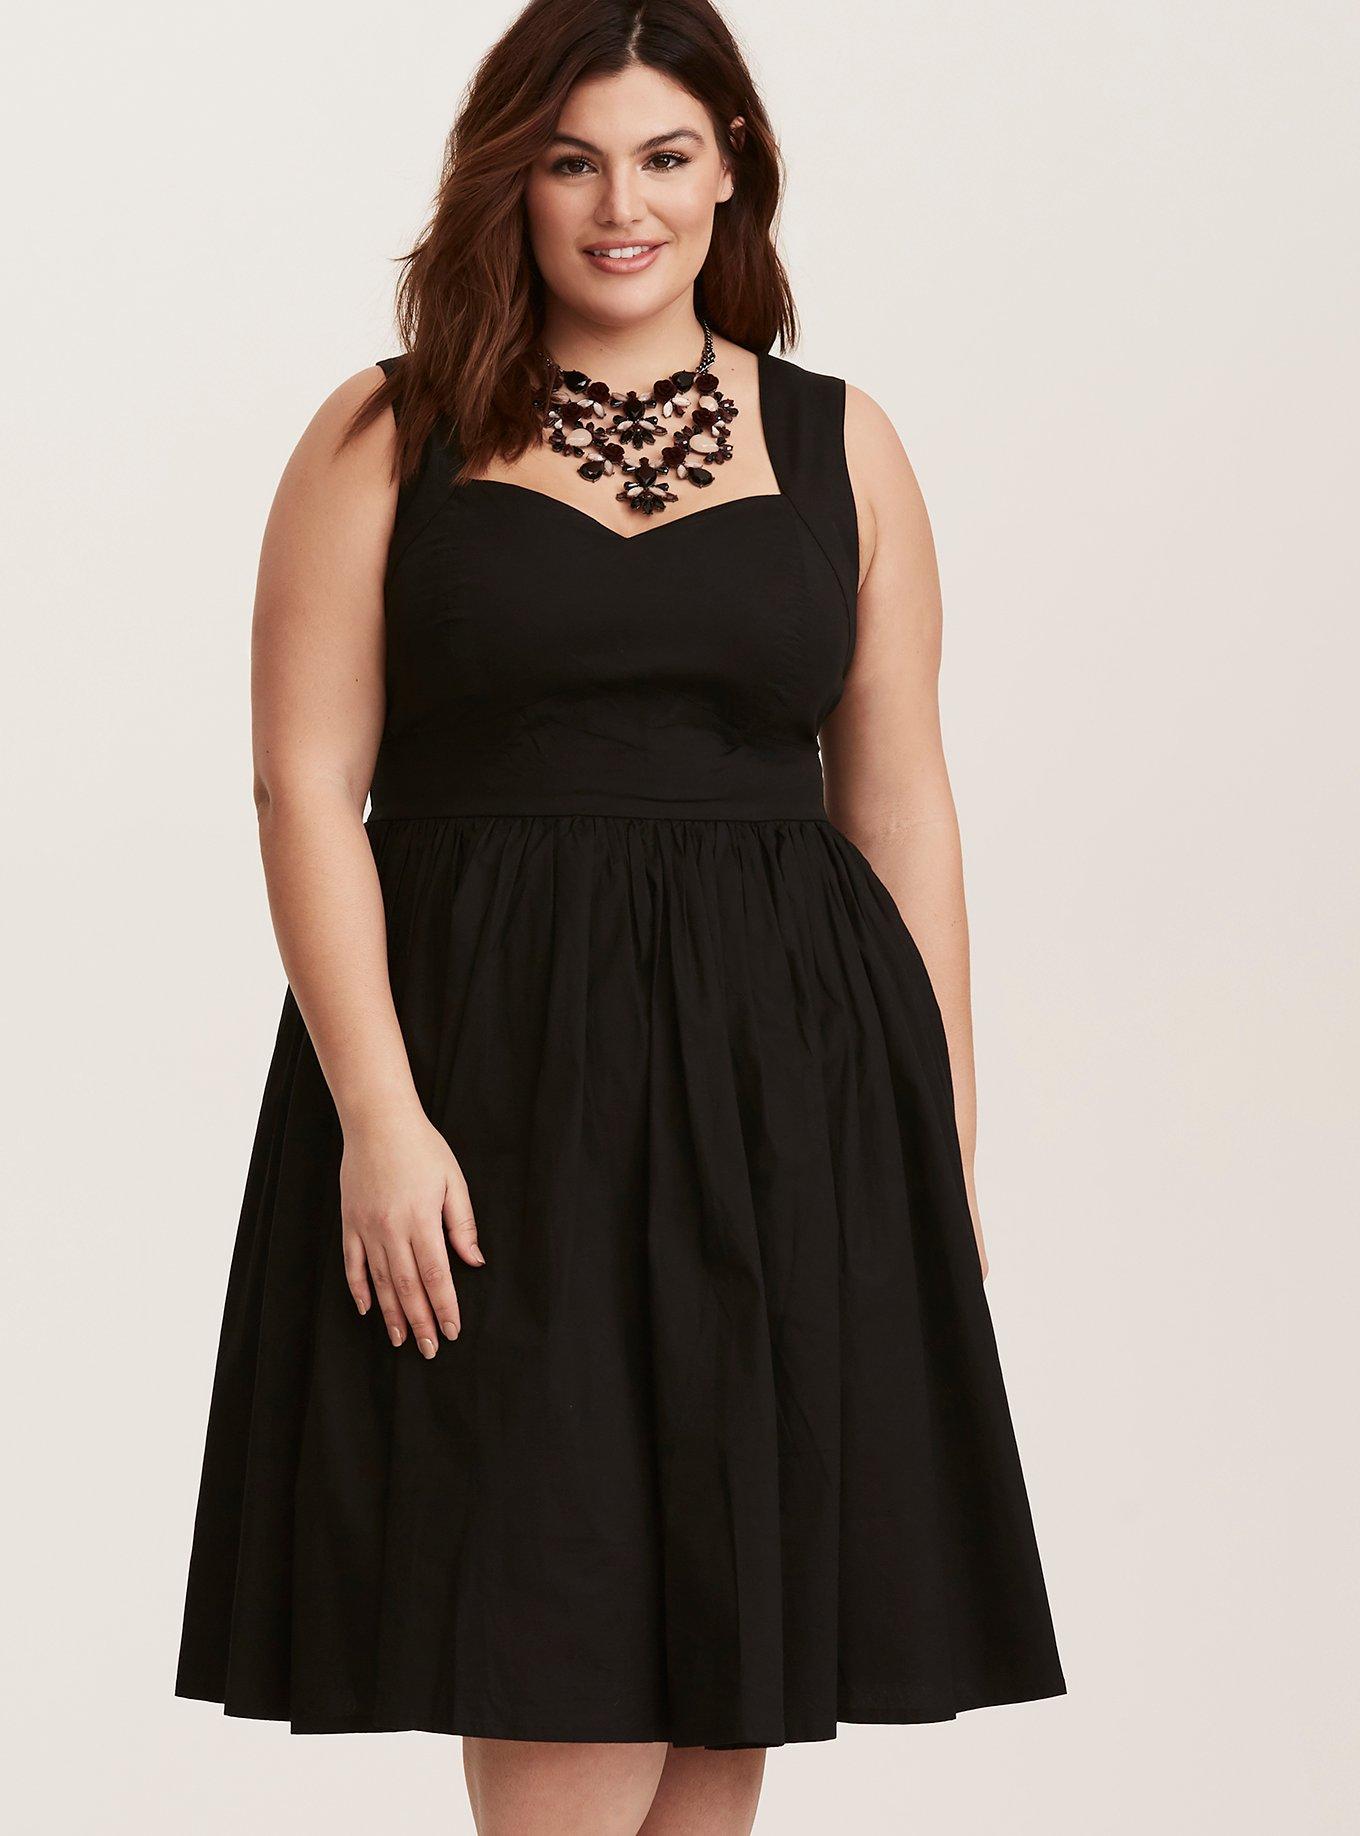 Torrid Plus Size Women's Clothing for sale in Coon Rapids, Minnesota